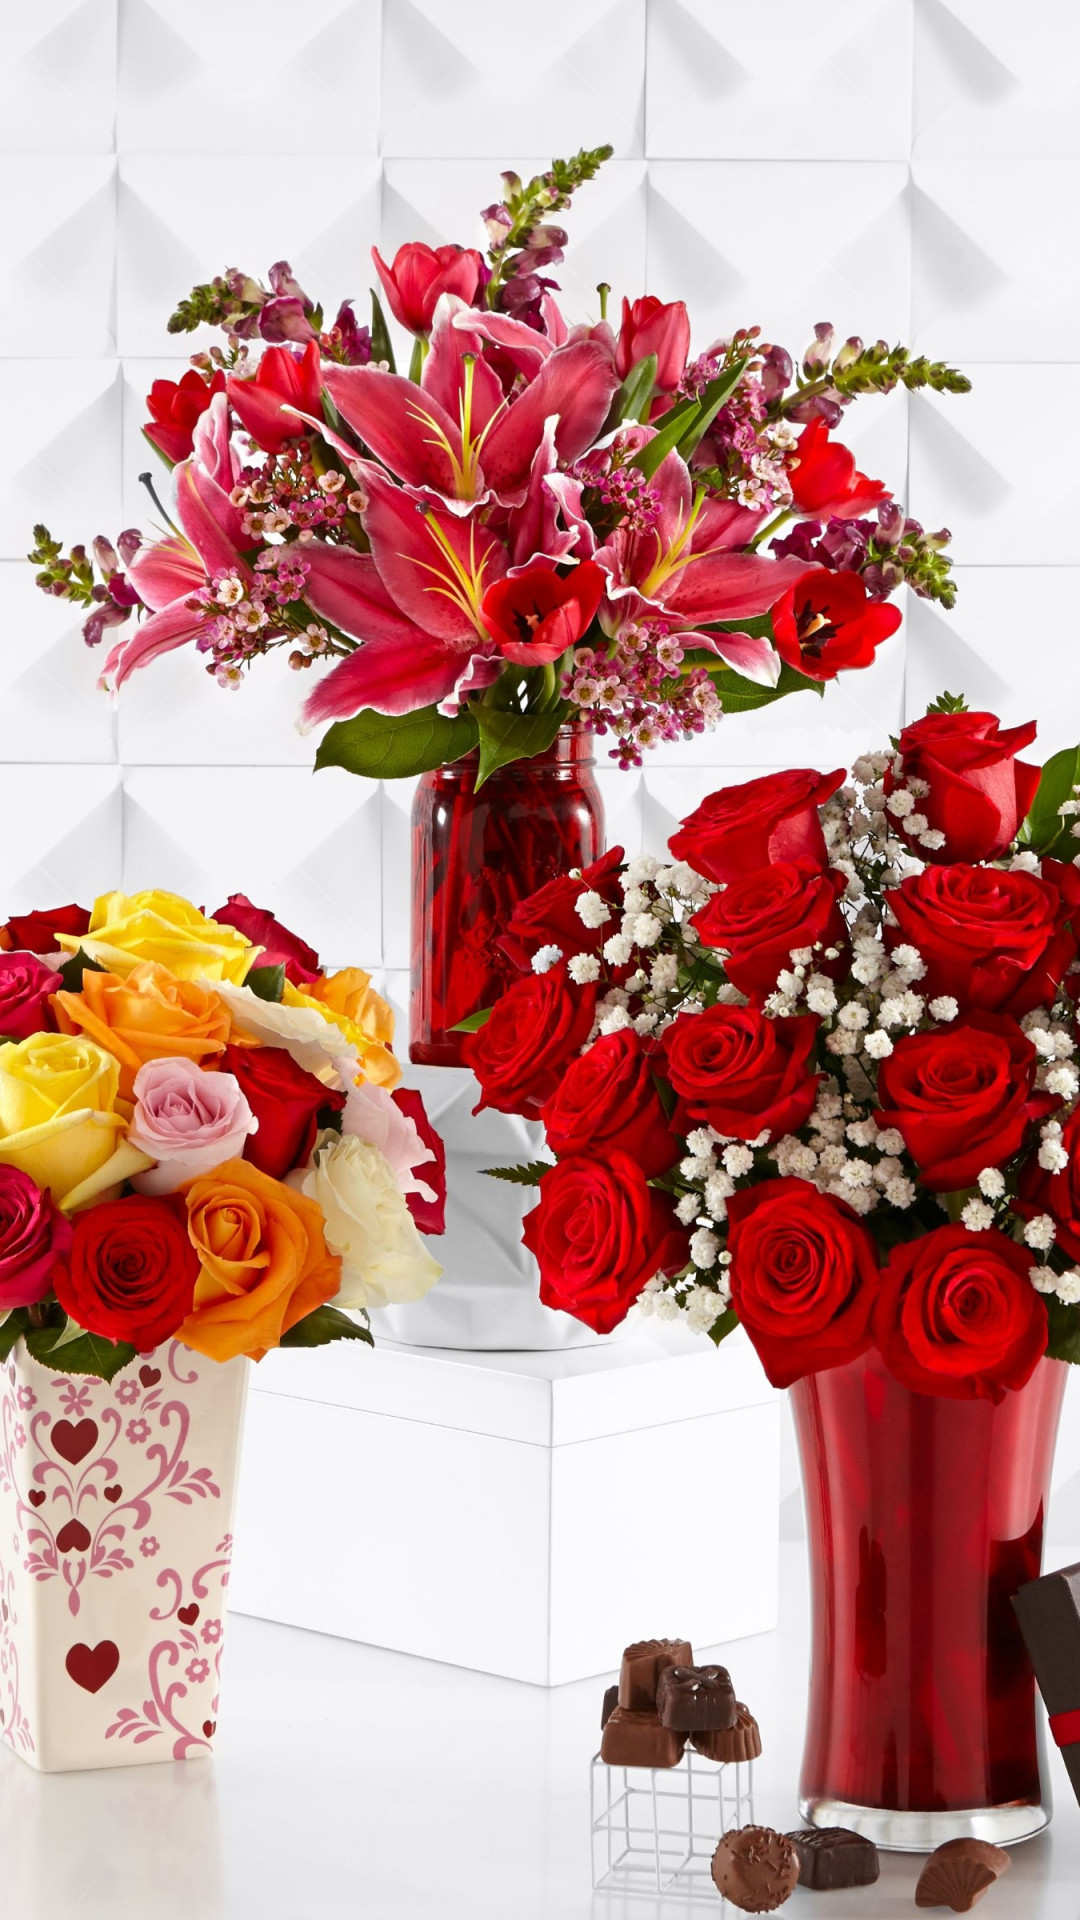 Bouquets of roses, lilies and tulips wallpaper 1080x1920